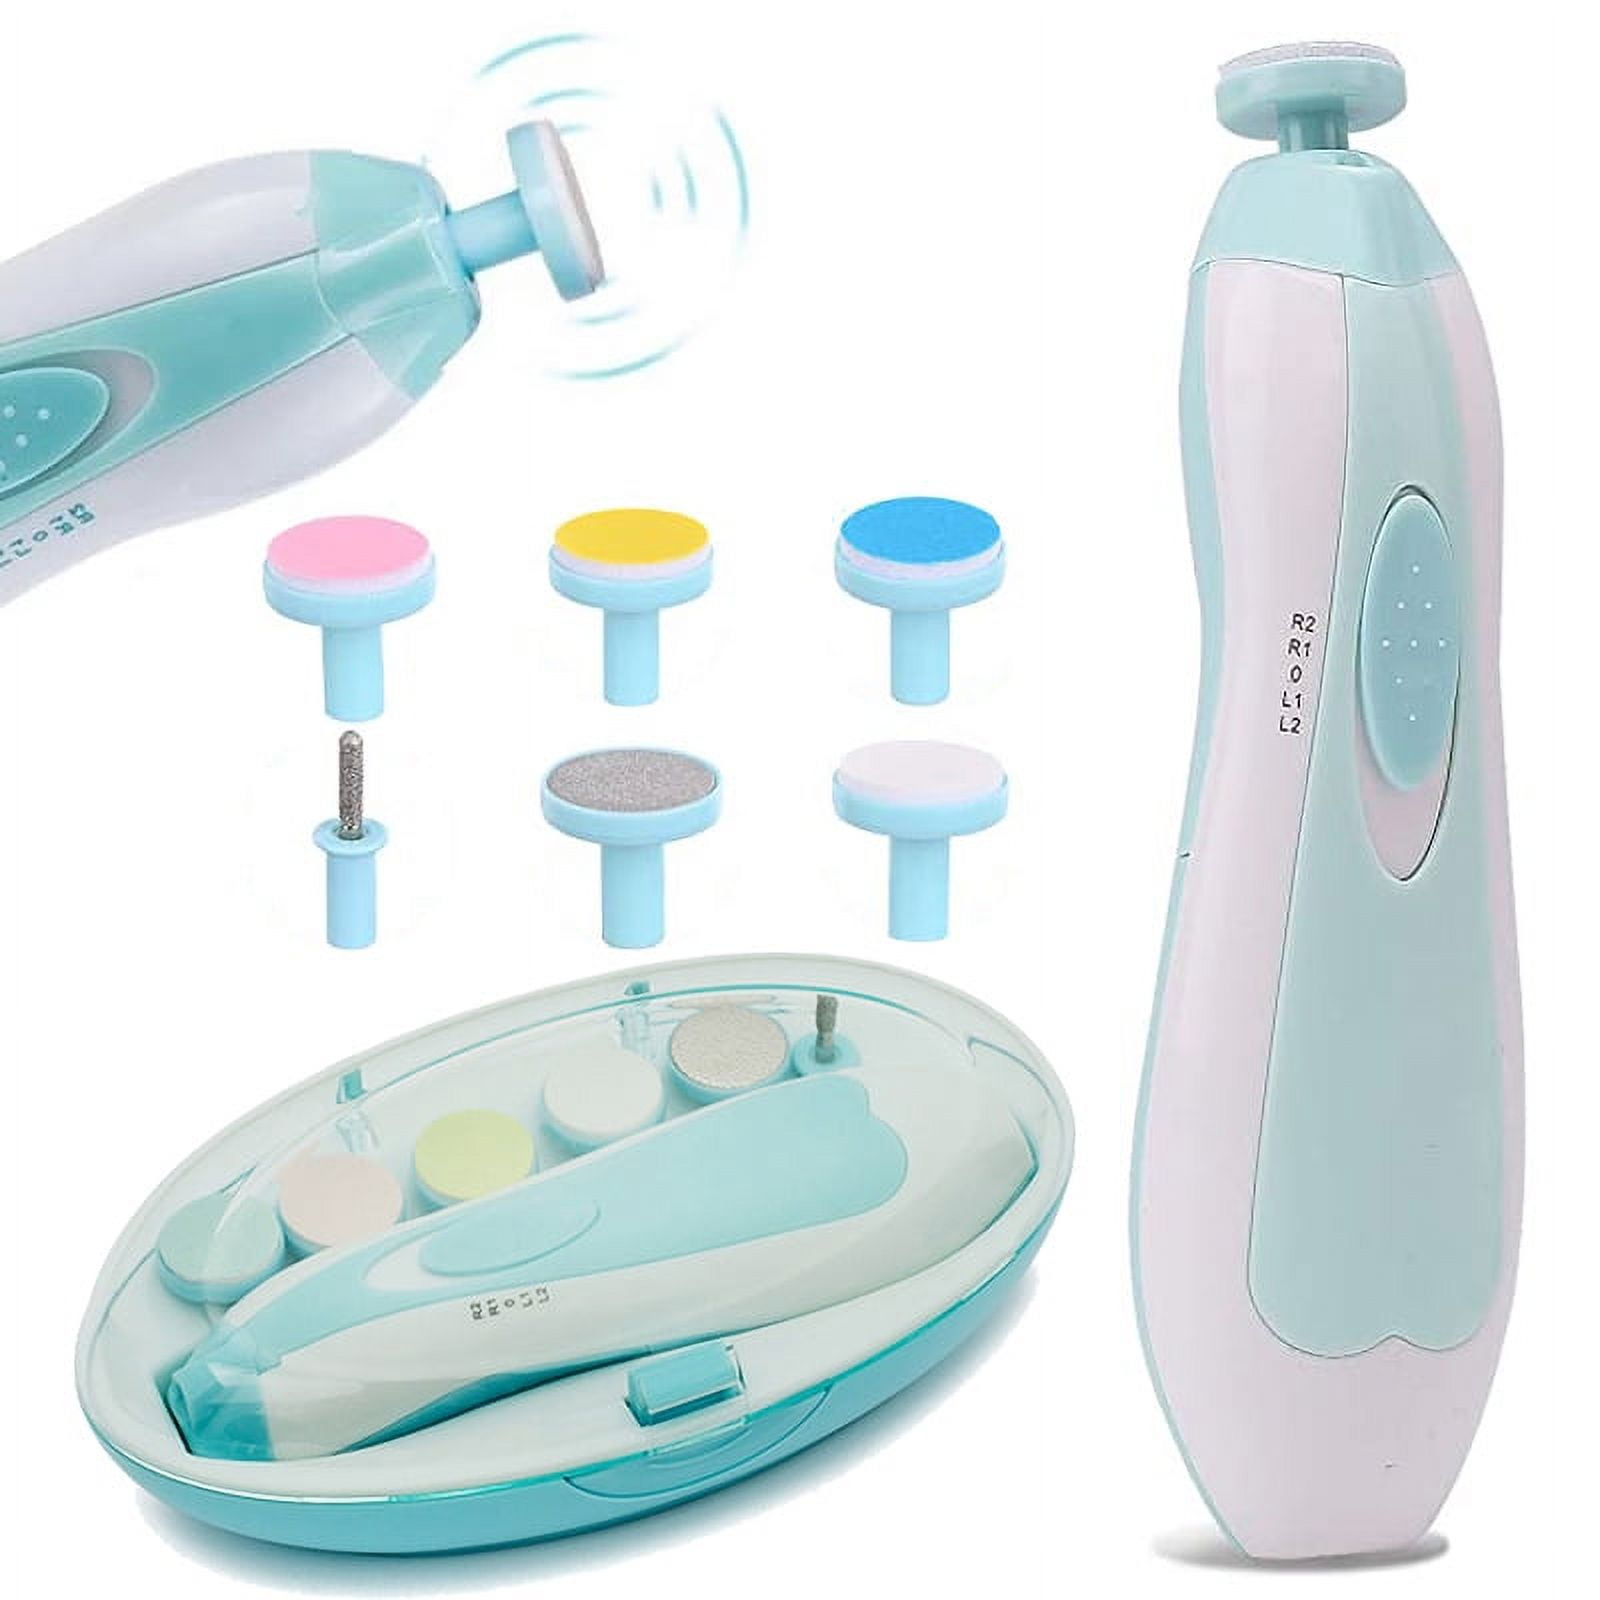 LNKOO Baby Nail Clippers , Electric Baby Nail Trimmer, Safe Baby Nail File  for Newborn to Toddler Toes and Fingernails, Kids Nail Care, Polish and  Trim - Walmart.com